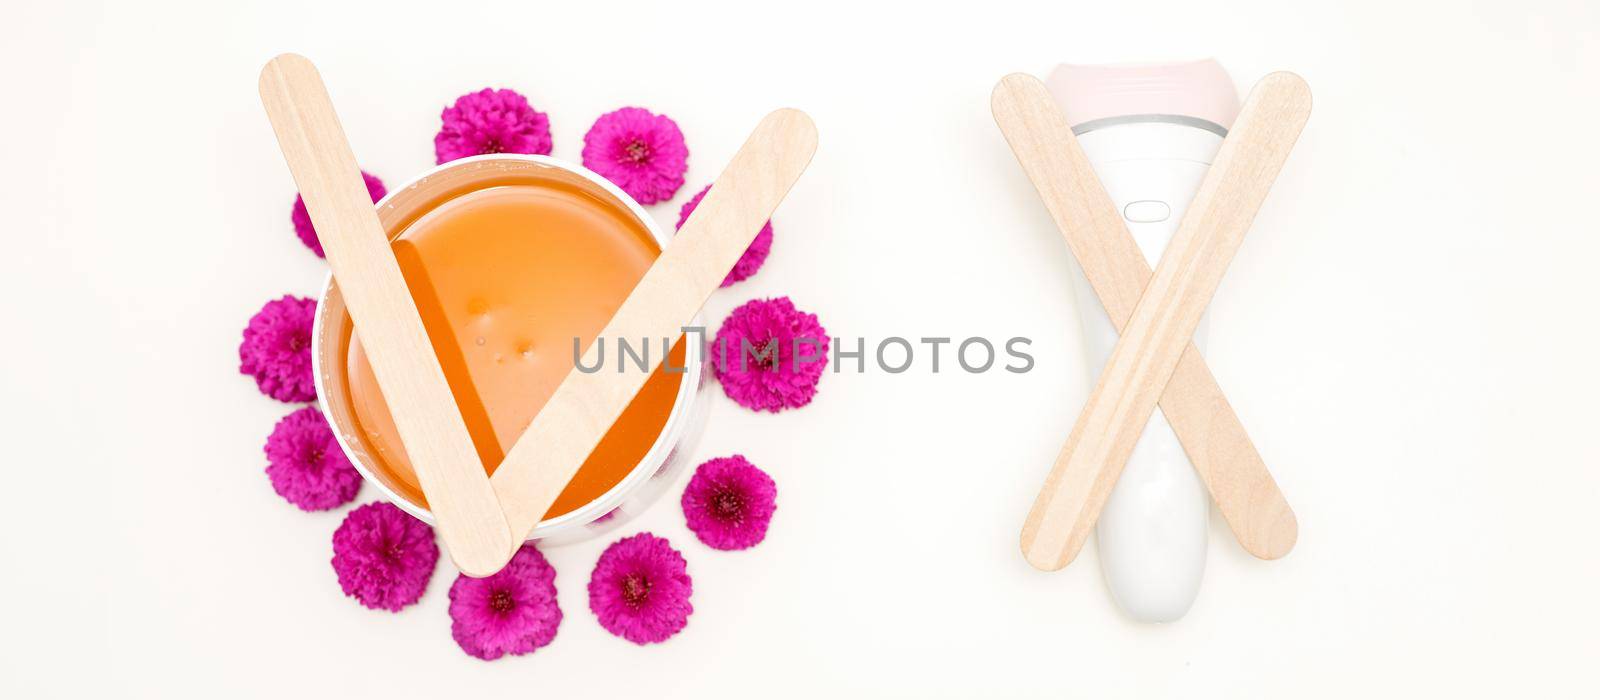 Waxing, depilation concept. Flat lay of the white cosmetic jar with sugar paste and epilator with wooden sticks lying on white background. by okskukuruza